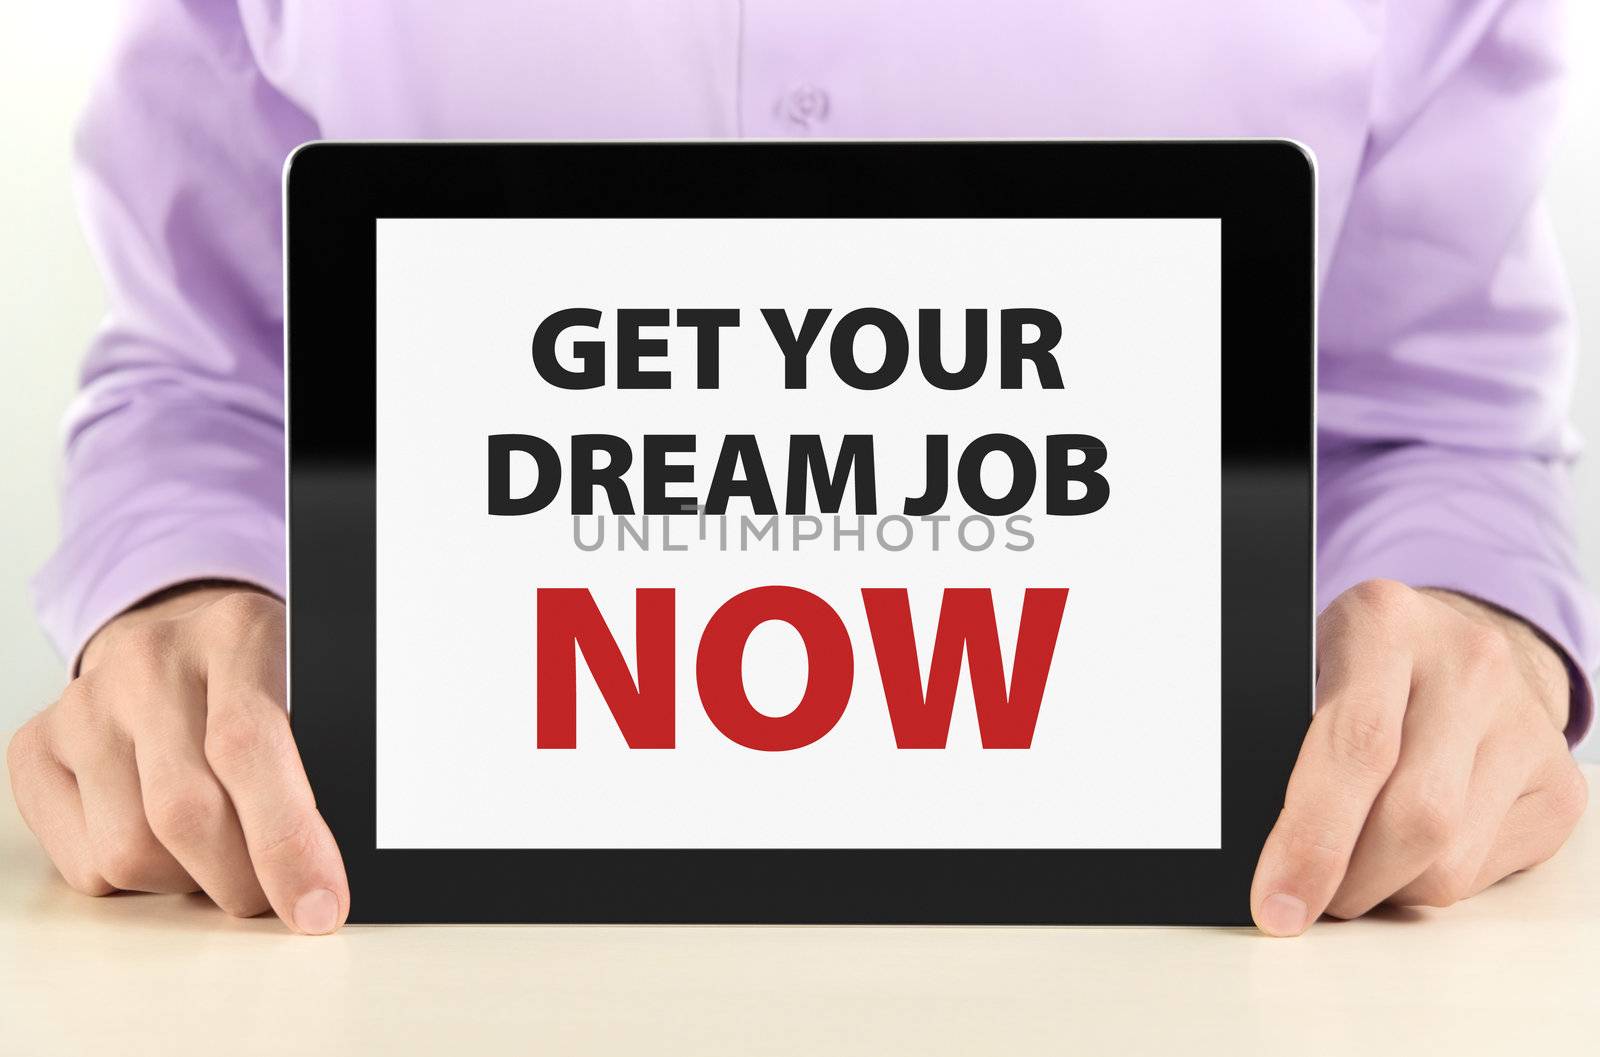 Get Your Dream Job Now by bloomua